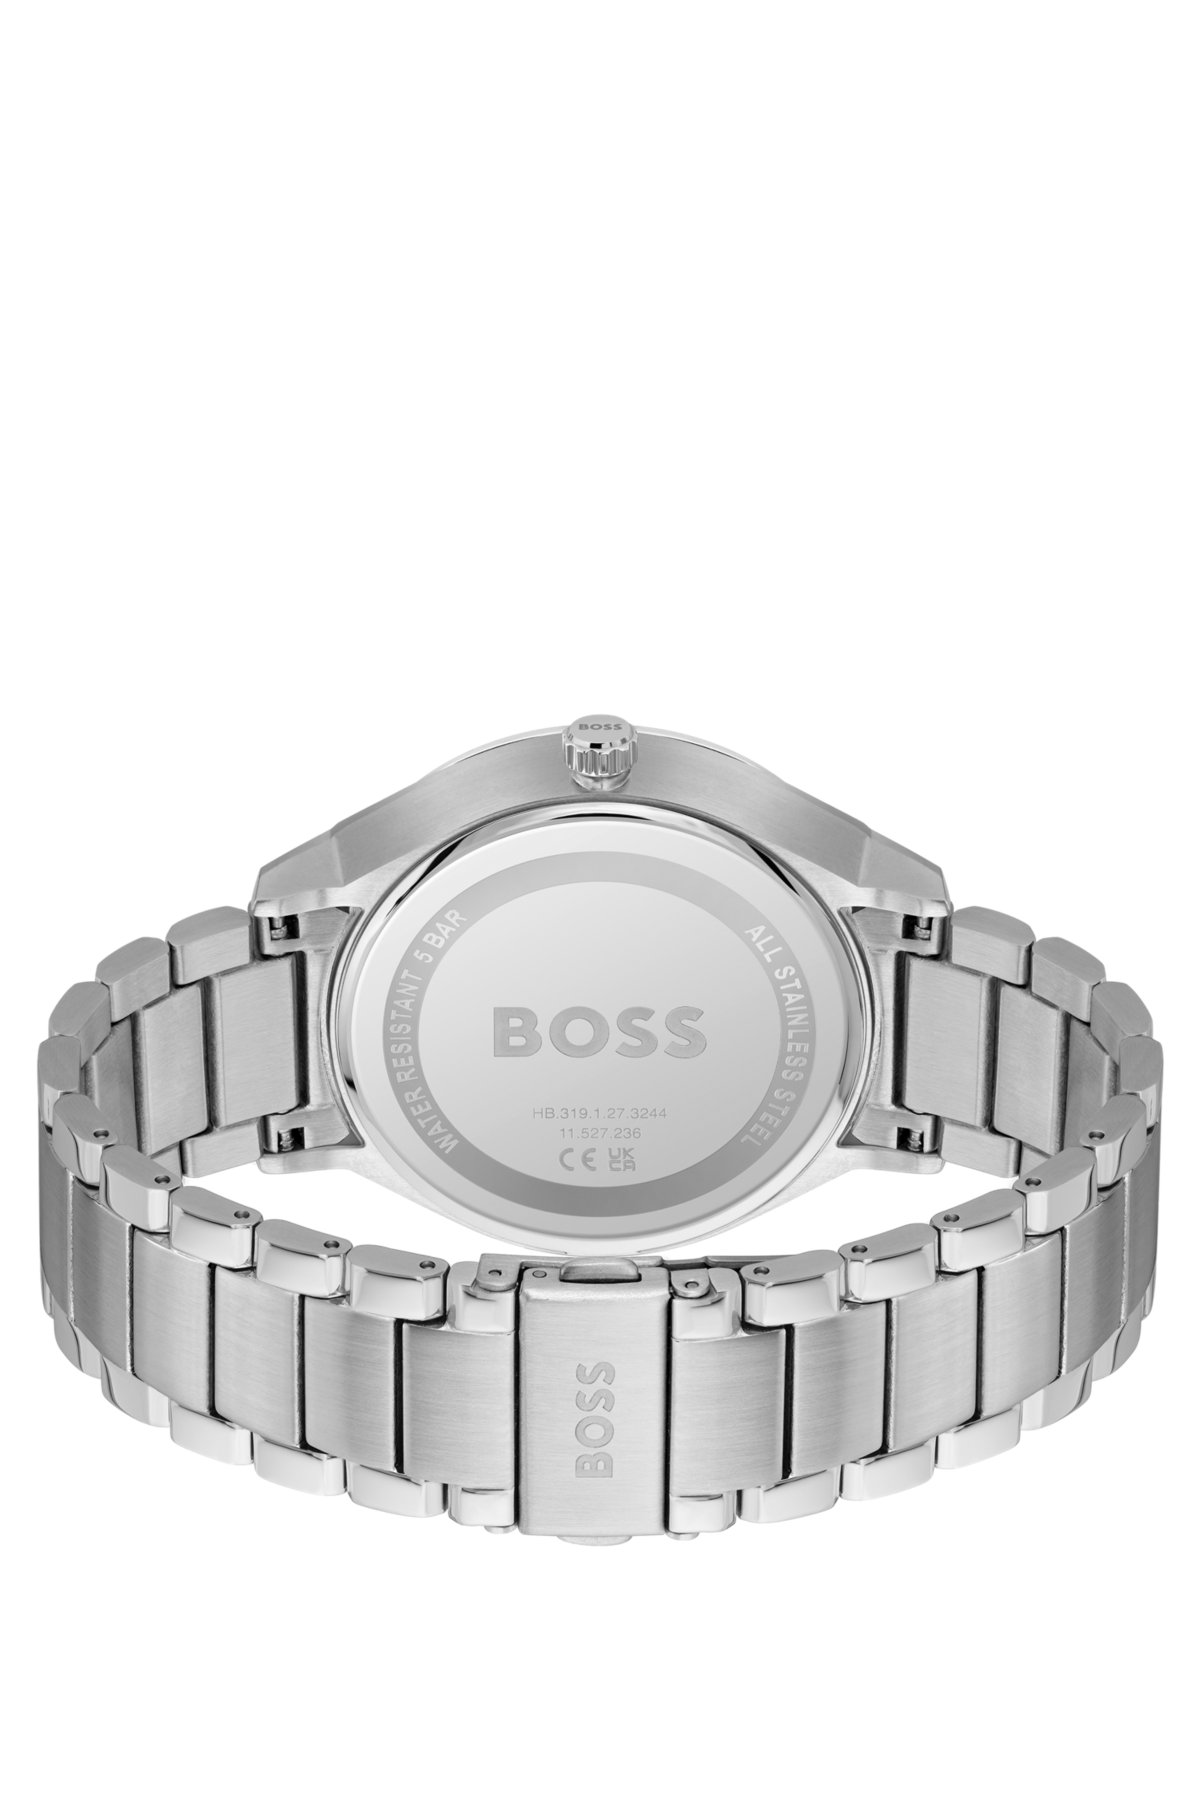 BOSS - Blue-dial watch with stainless-steel link bracelet